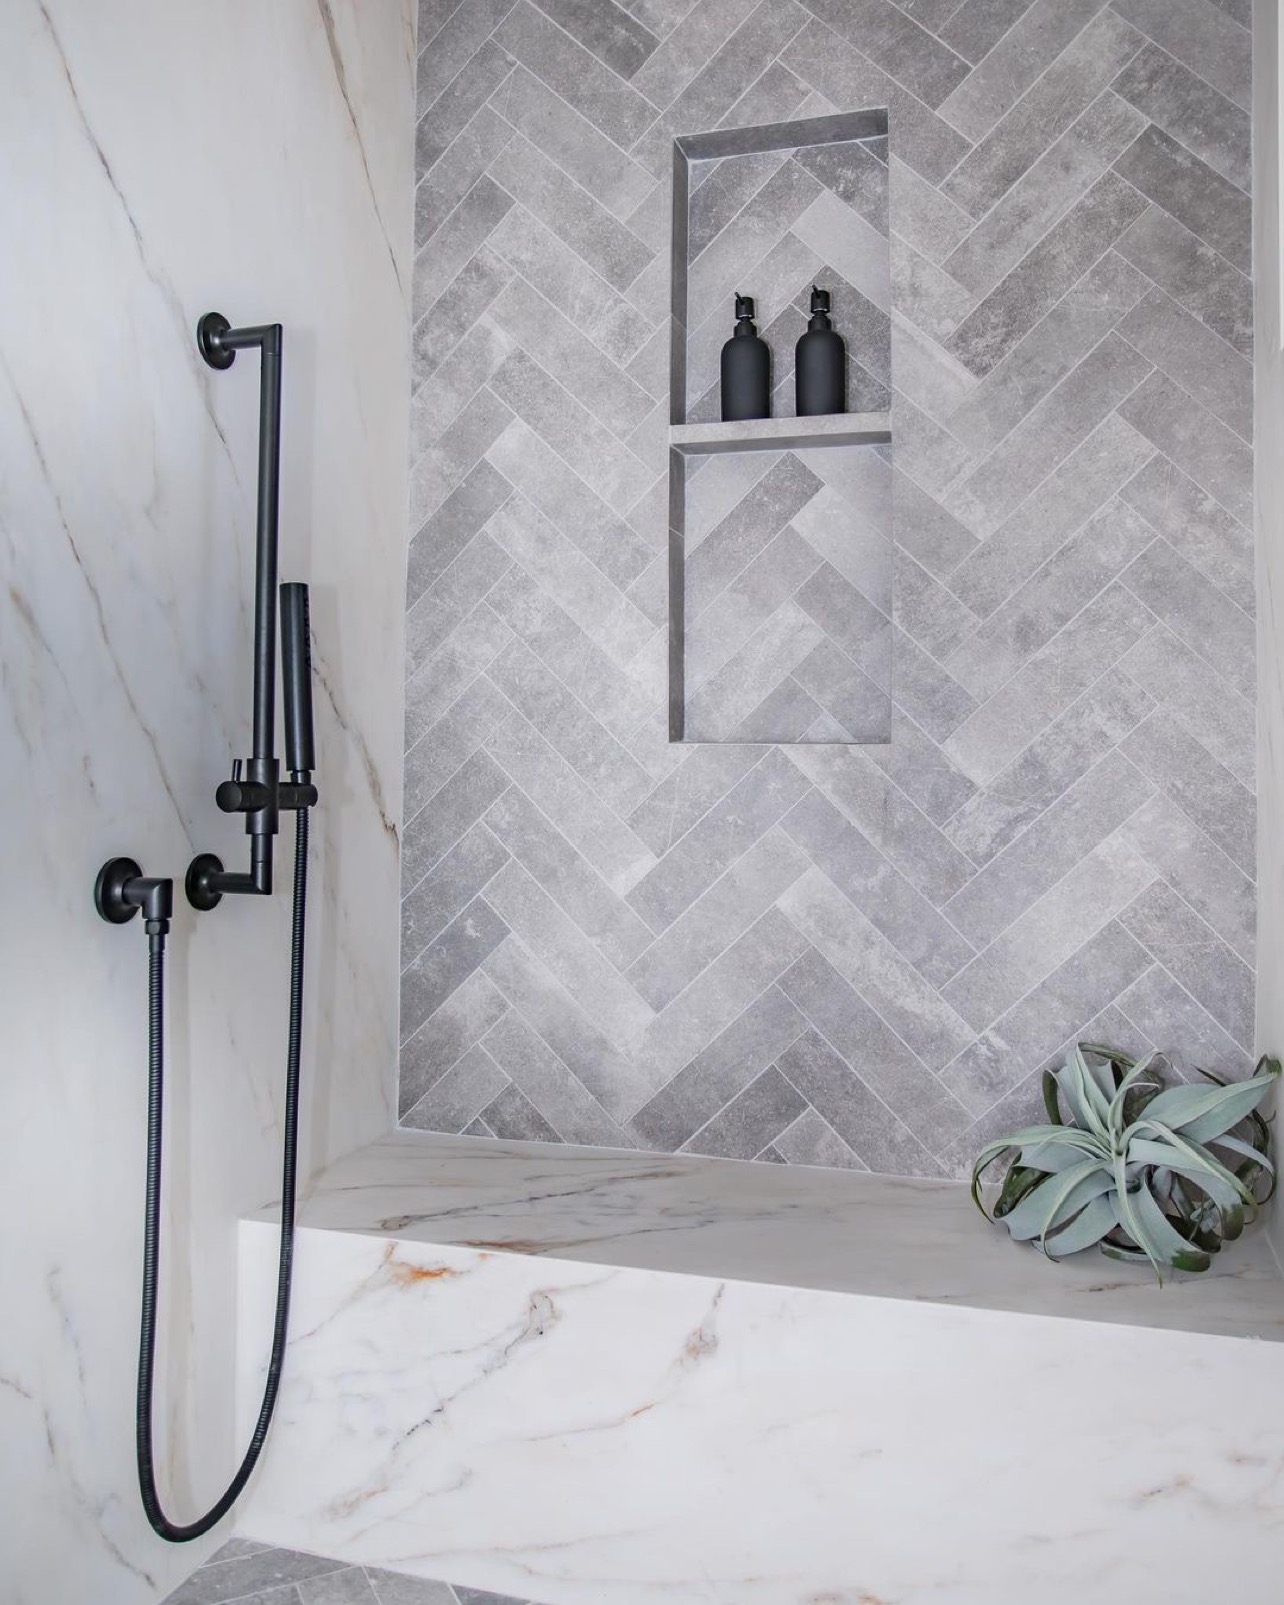 Oversized shower bench seat and herringbone tile accent wall